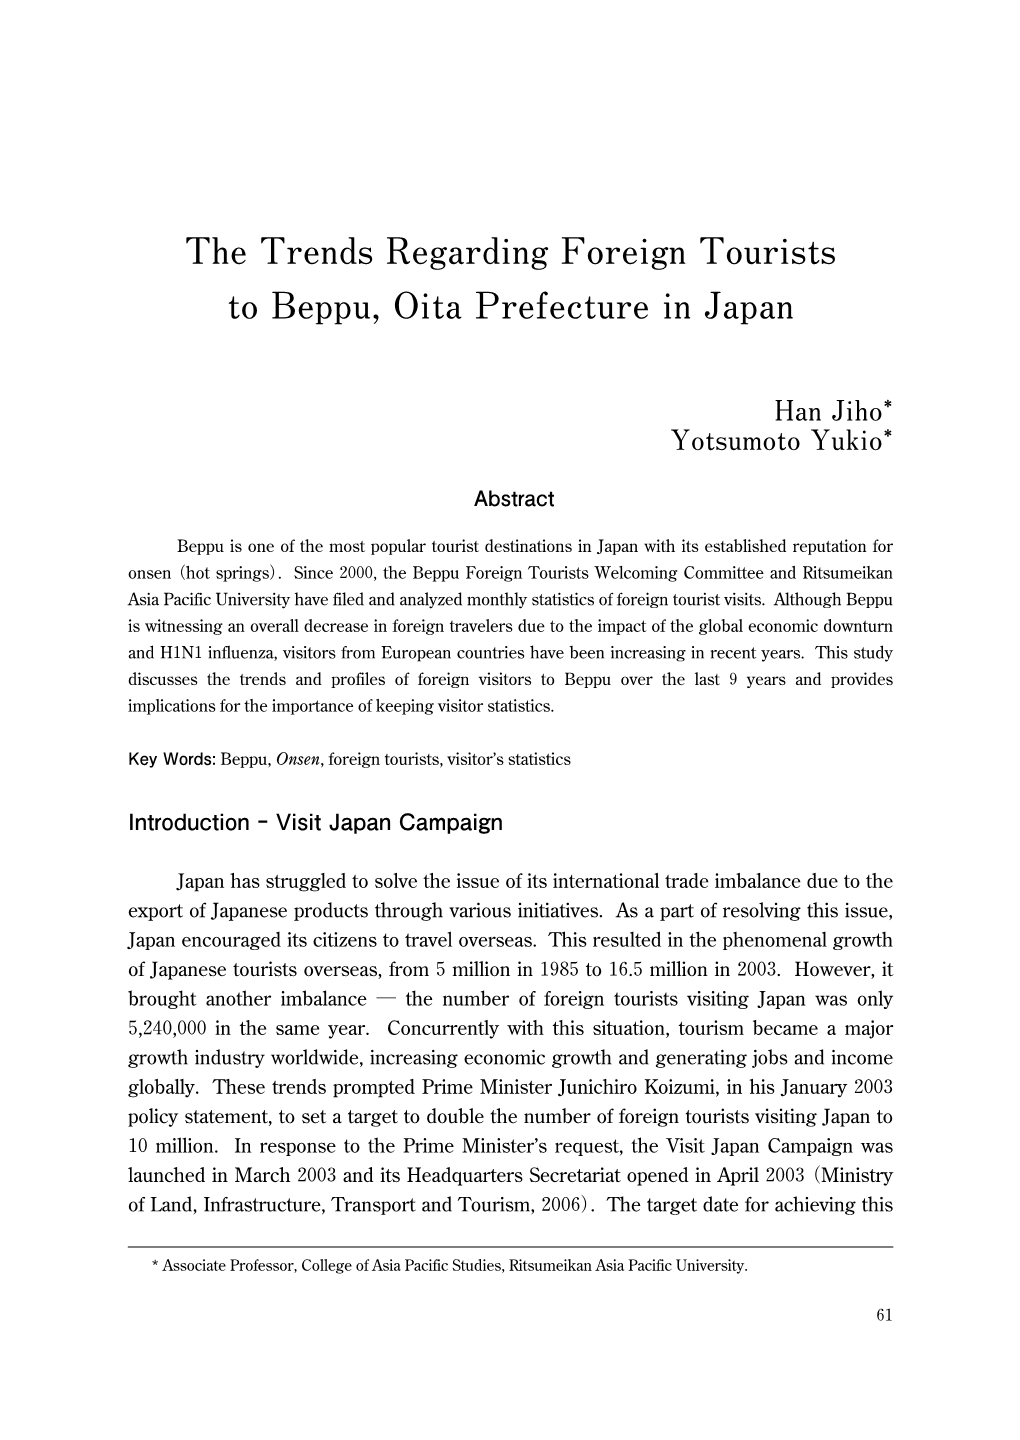 The Trends Regarding Foreign Tourists to Beppu, Oita Prefecture in Japan